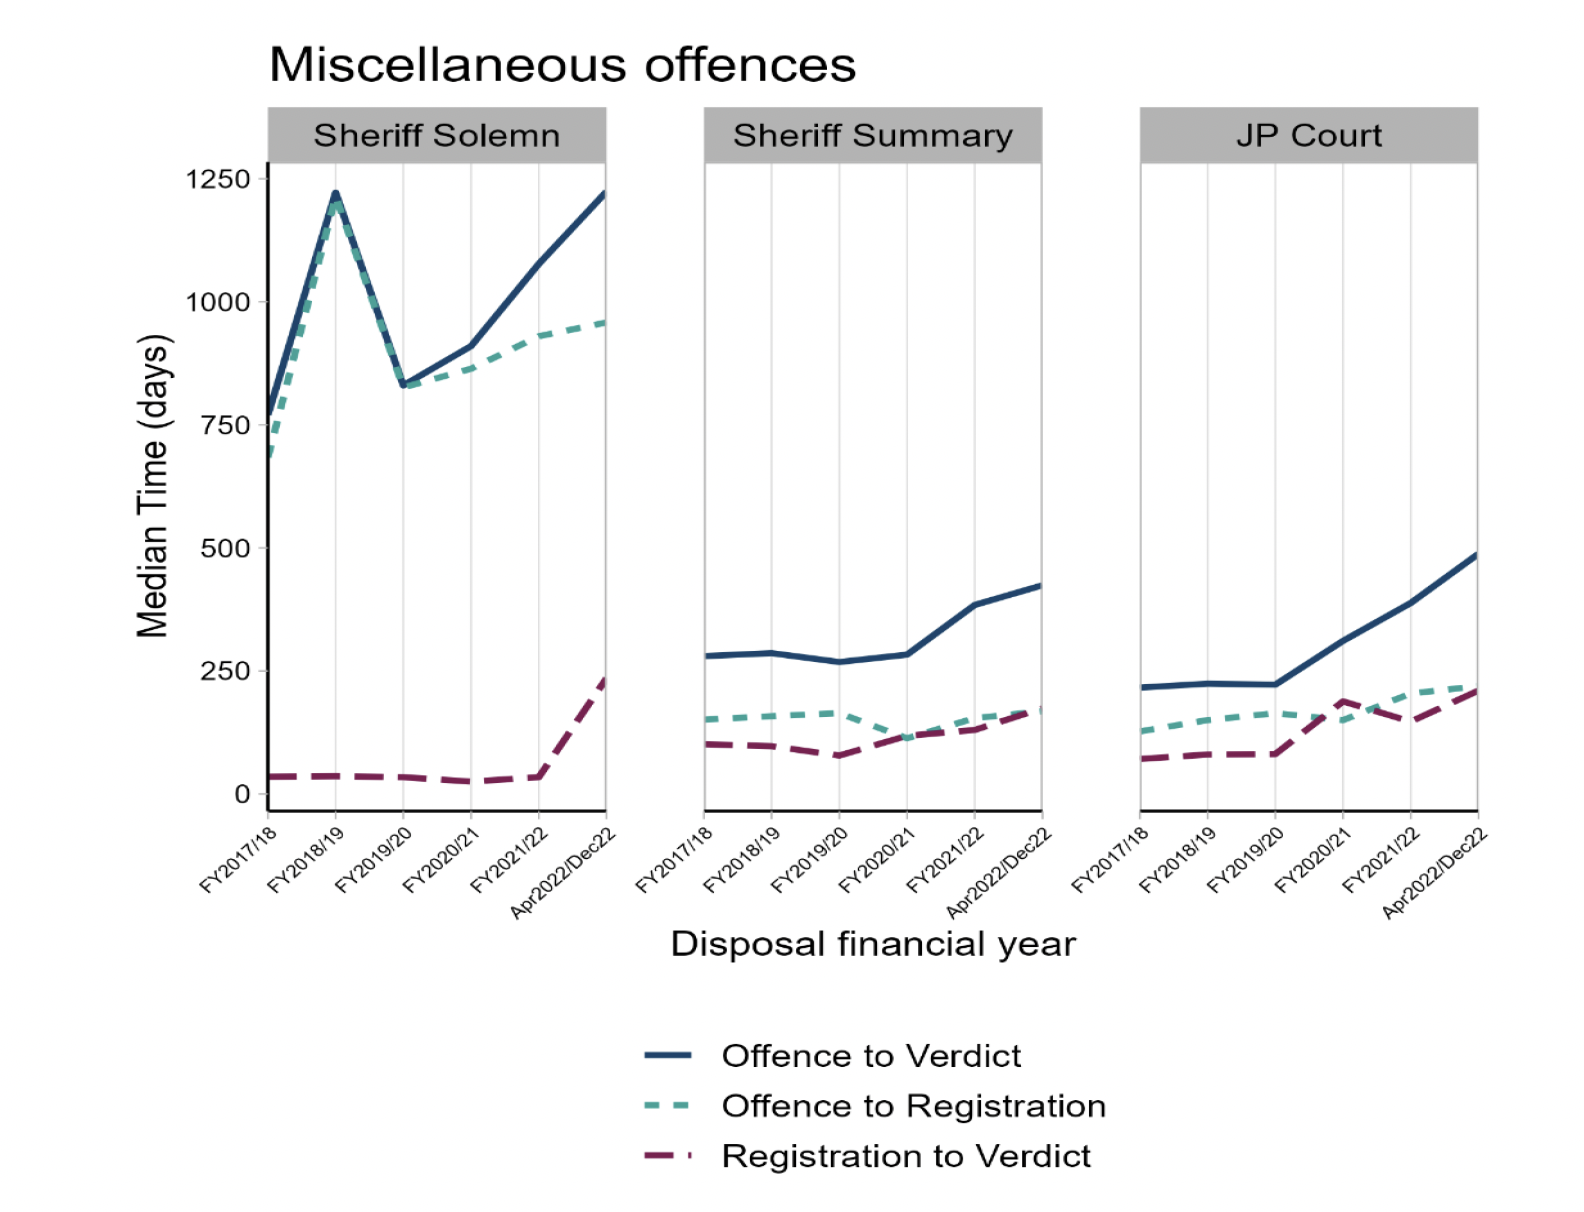 Figure 14: Three line charts showing offence to verdict, offence to registration and registration to verdict median times for accused with miscellaneous offences in Sheriff Solemn, Sheriff Summary and JP Court showing that all times have increased since the beginning of COVID-19 pandemic.